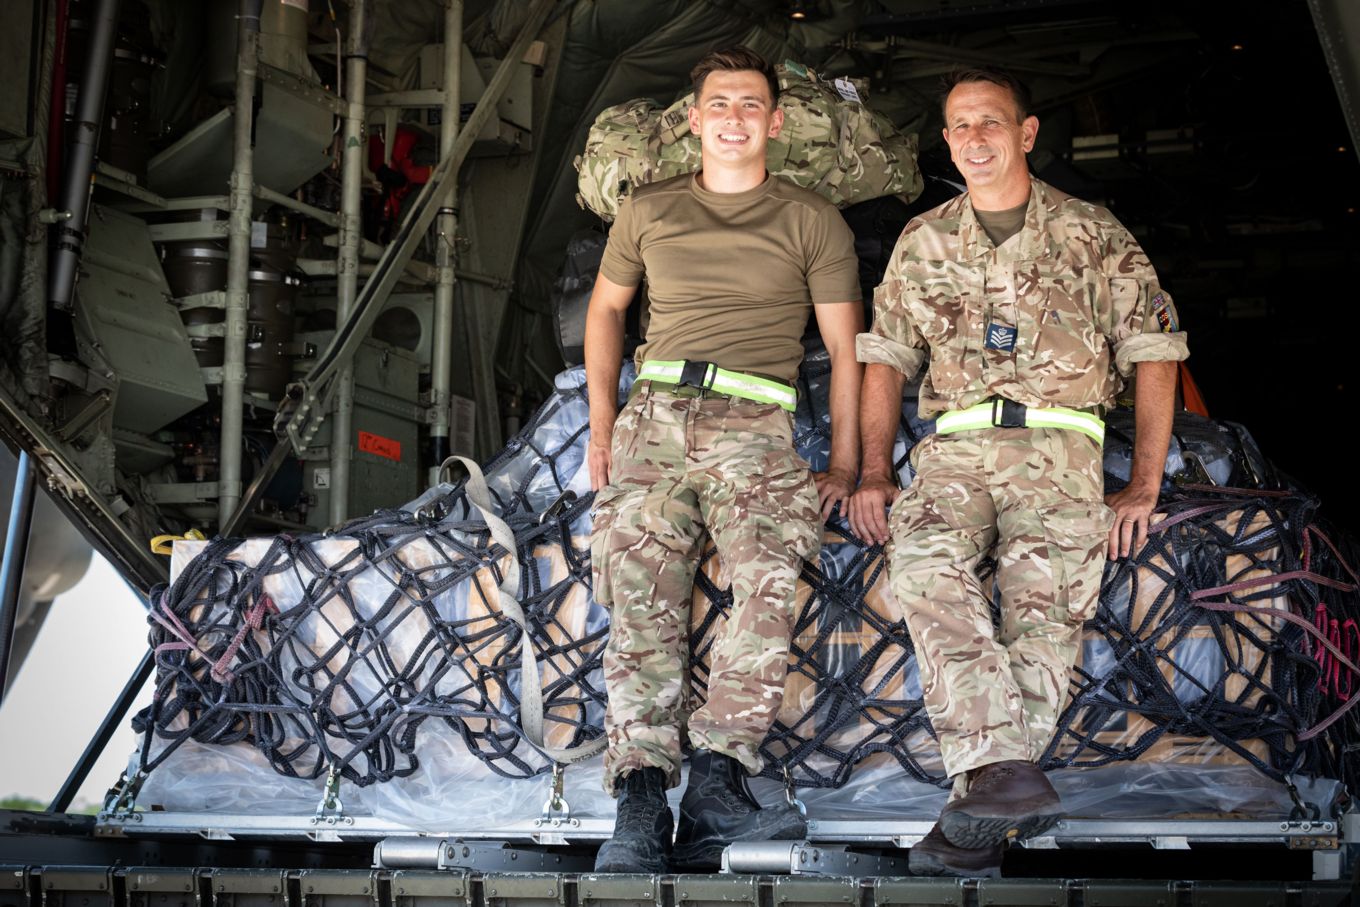 A father and son team from Calne in Wiltshire are working alongside each other on the Joint Movements Squadron at RAF Akrotiri